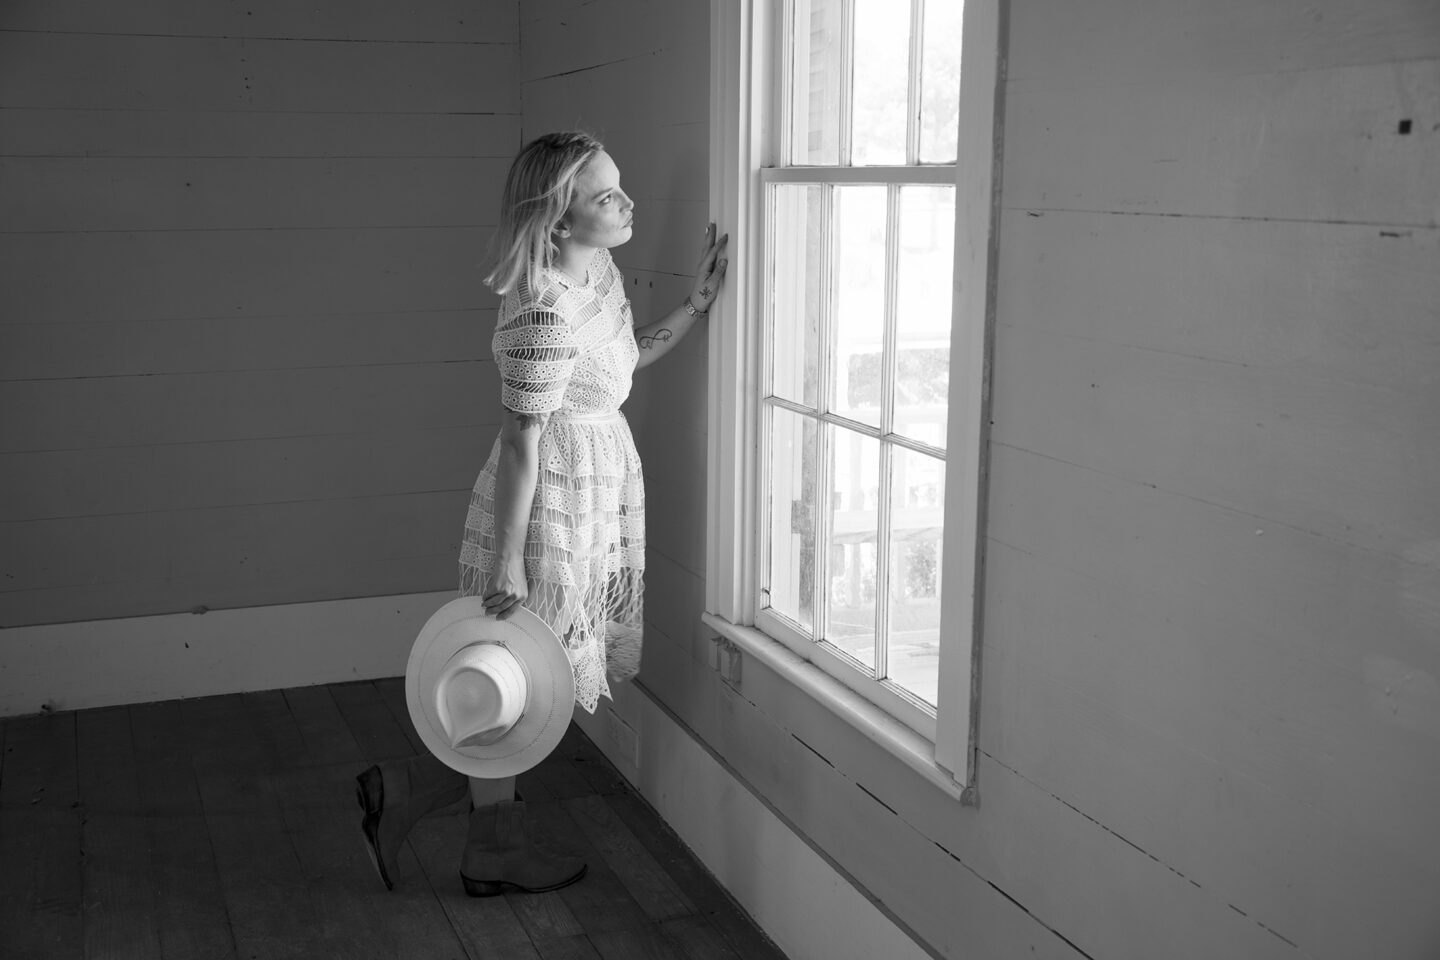 Black and white image, portrait of a woman in a dress holding a cowboy hat gazing out a window 